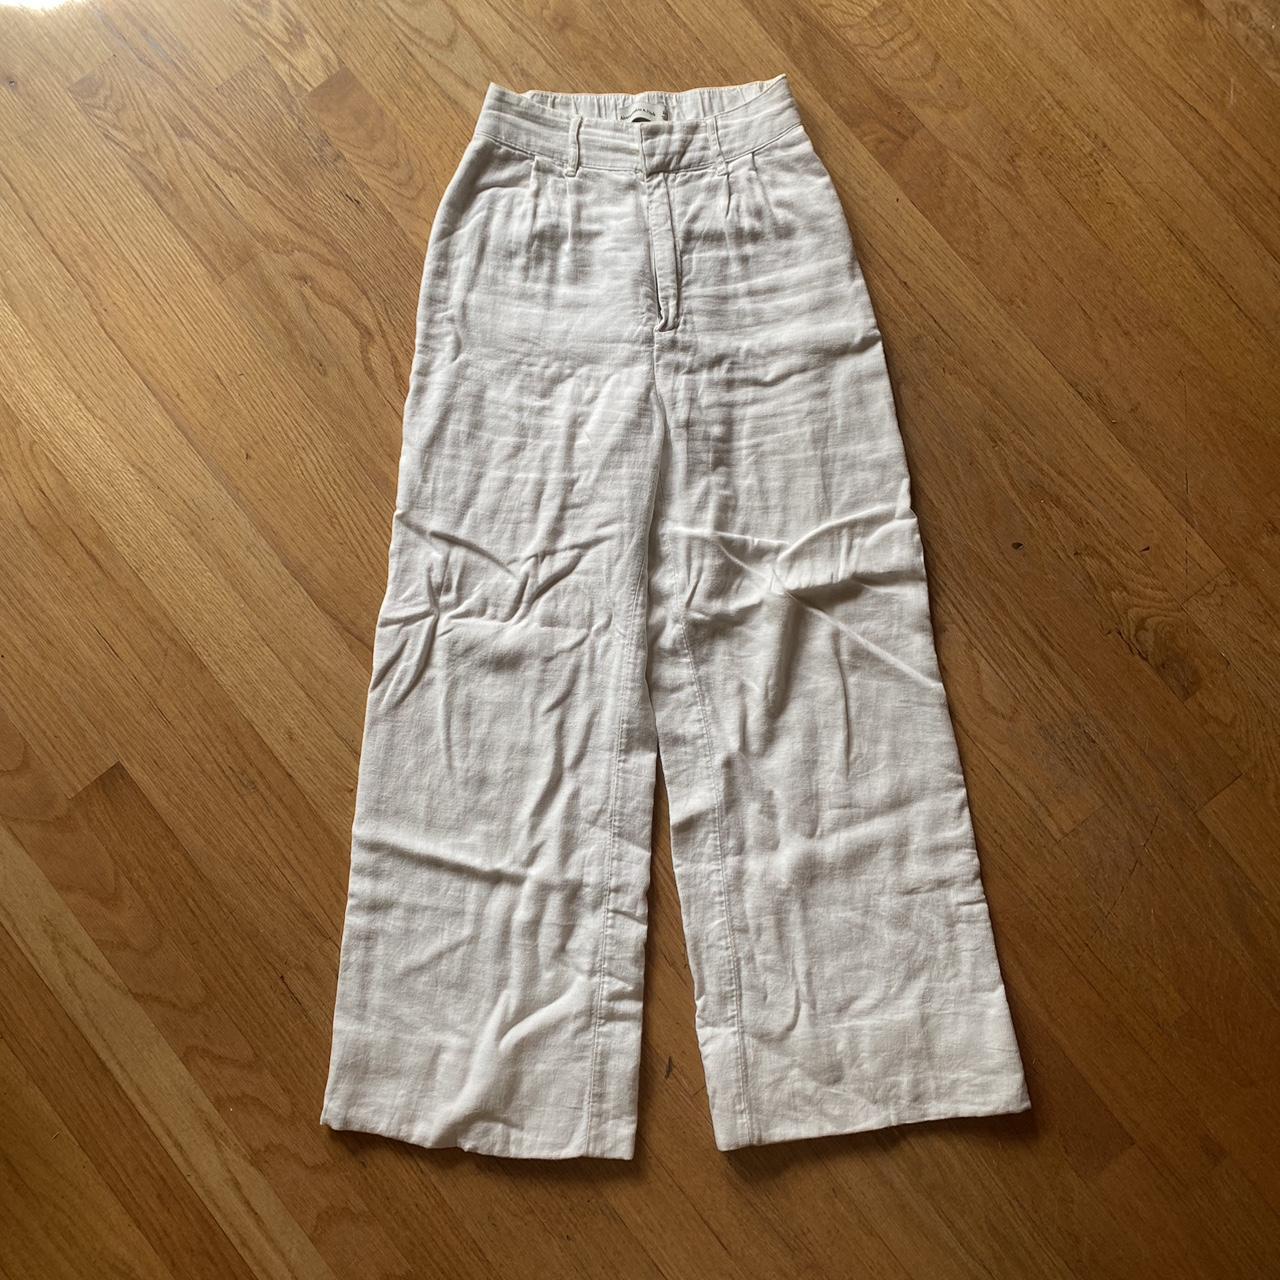 Abercrombie & Fitch Women's Cream and White Trousers | Depop